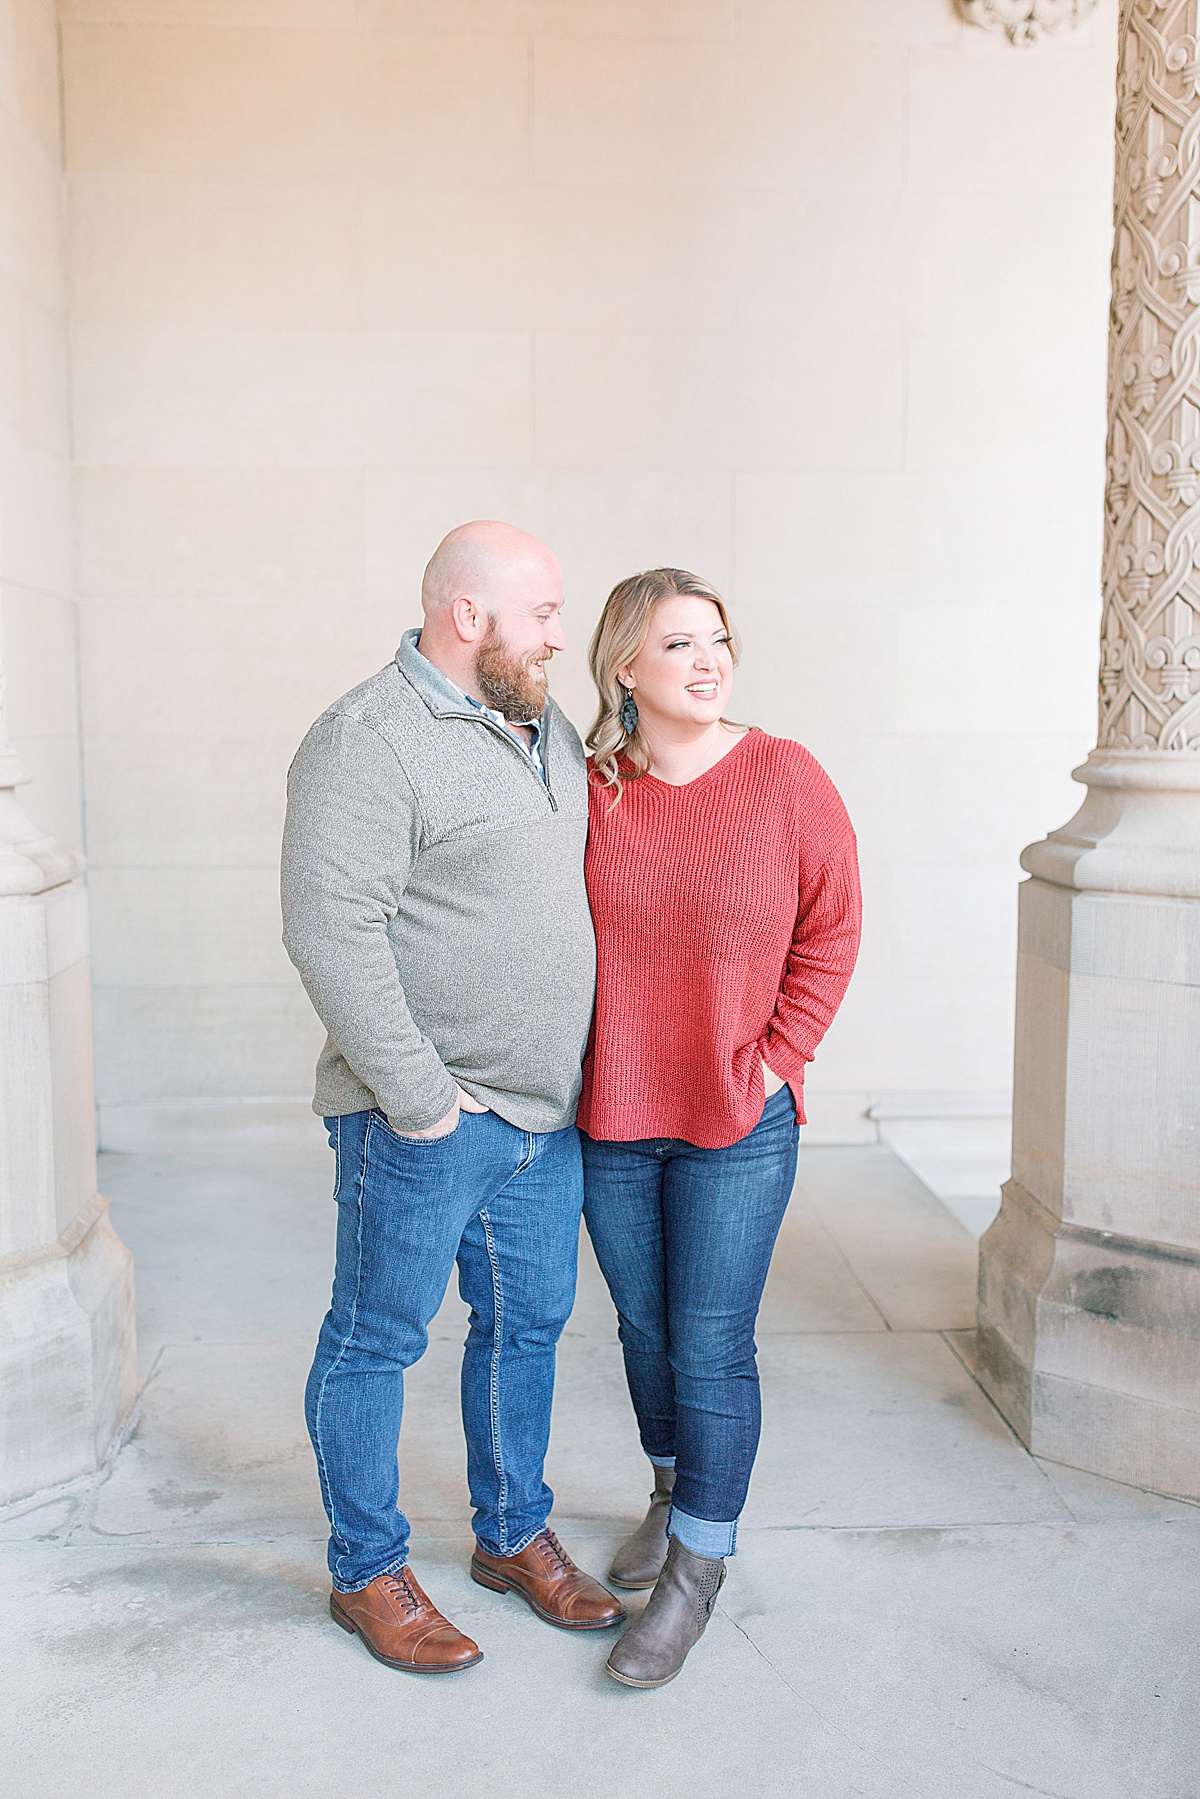 Biltmore Estate Engagement Session Couple Hugging and Smiling Photo